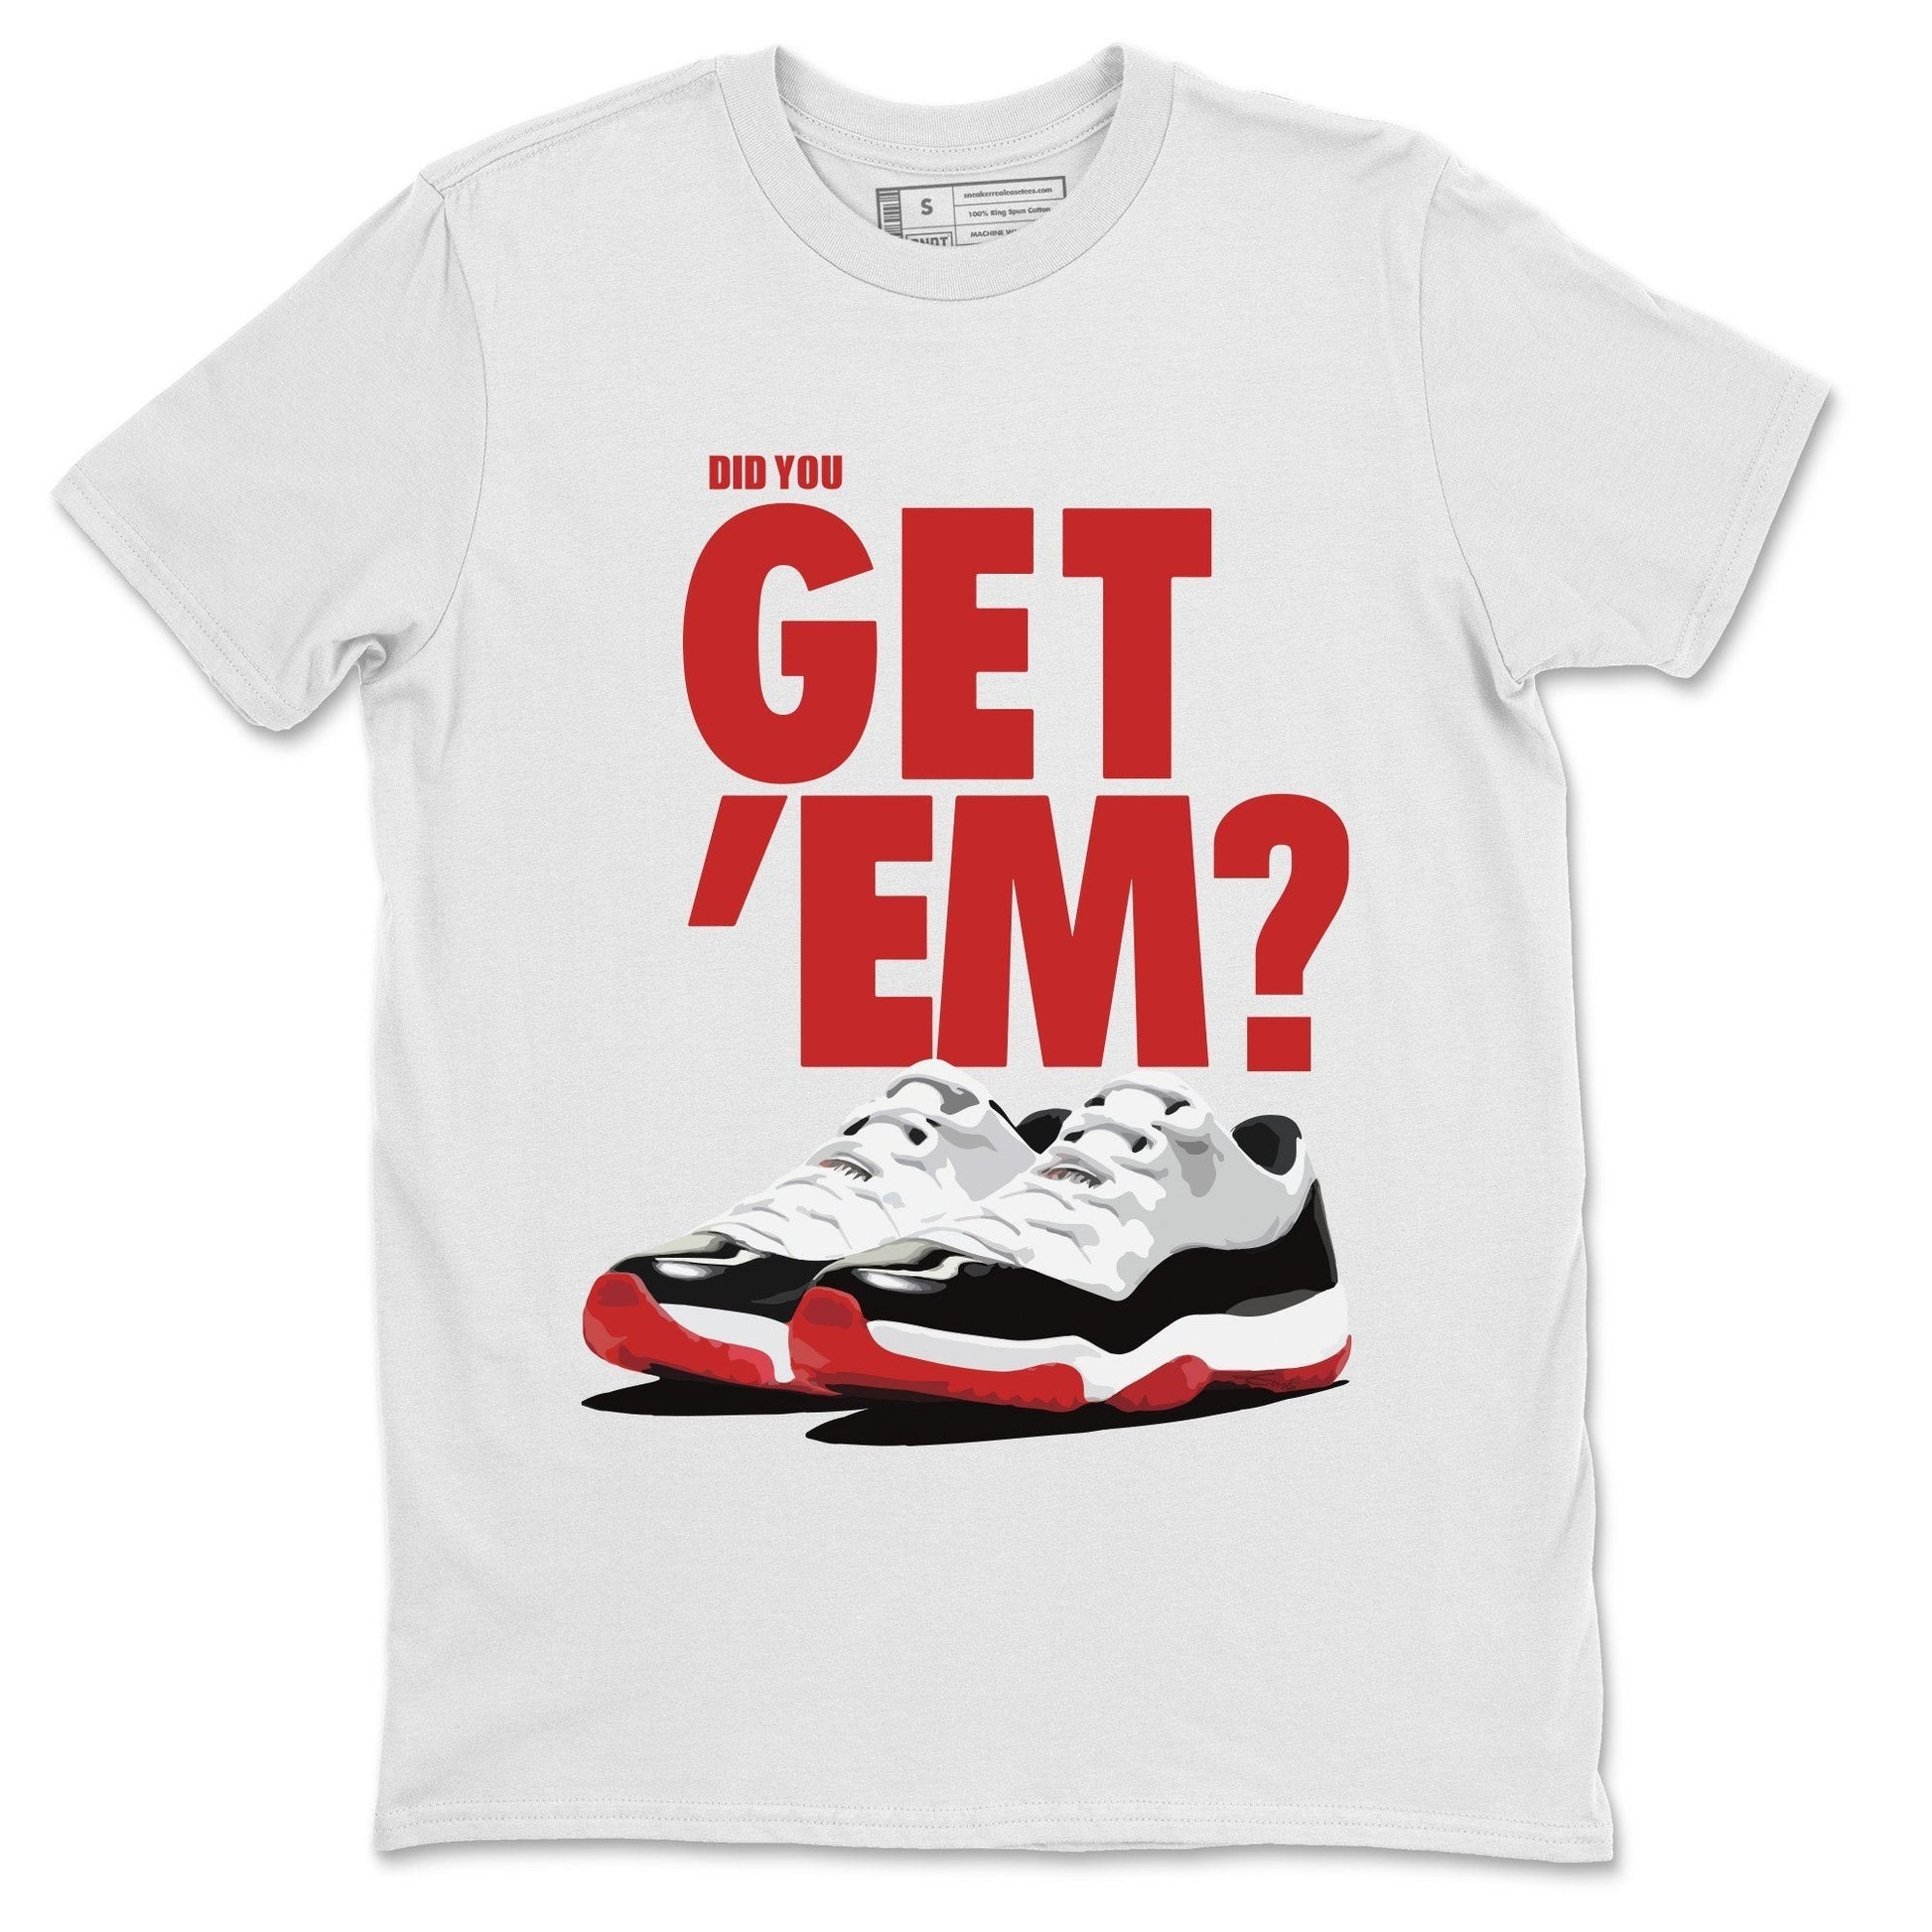 Jordan 11 Concord Bred Sneaker Match Tees Did You Get Em SNRT Sneaker Tees Jordan 11 Concord Bred SNRT Sneaker Release Tees Unisex Shirts